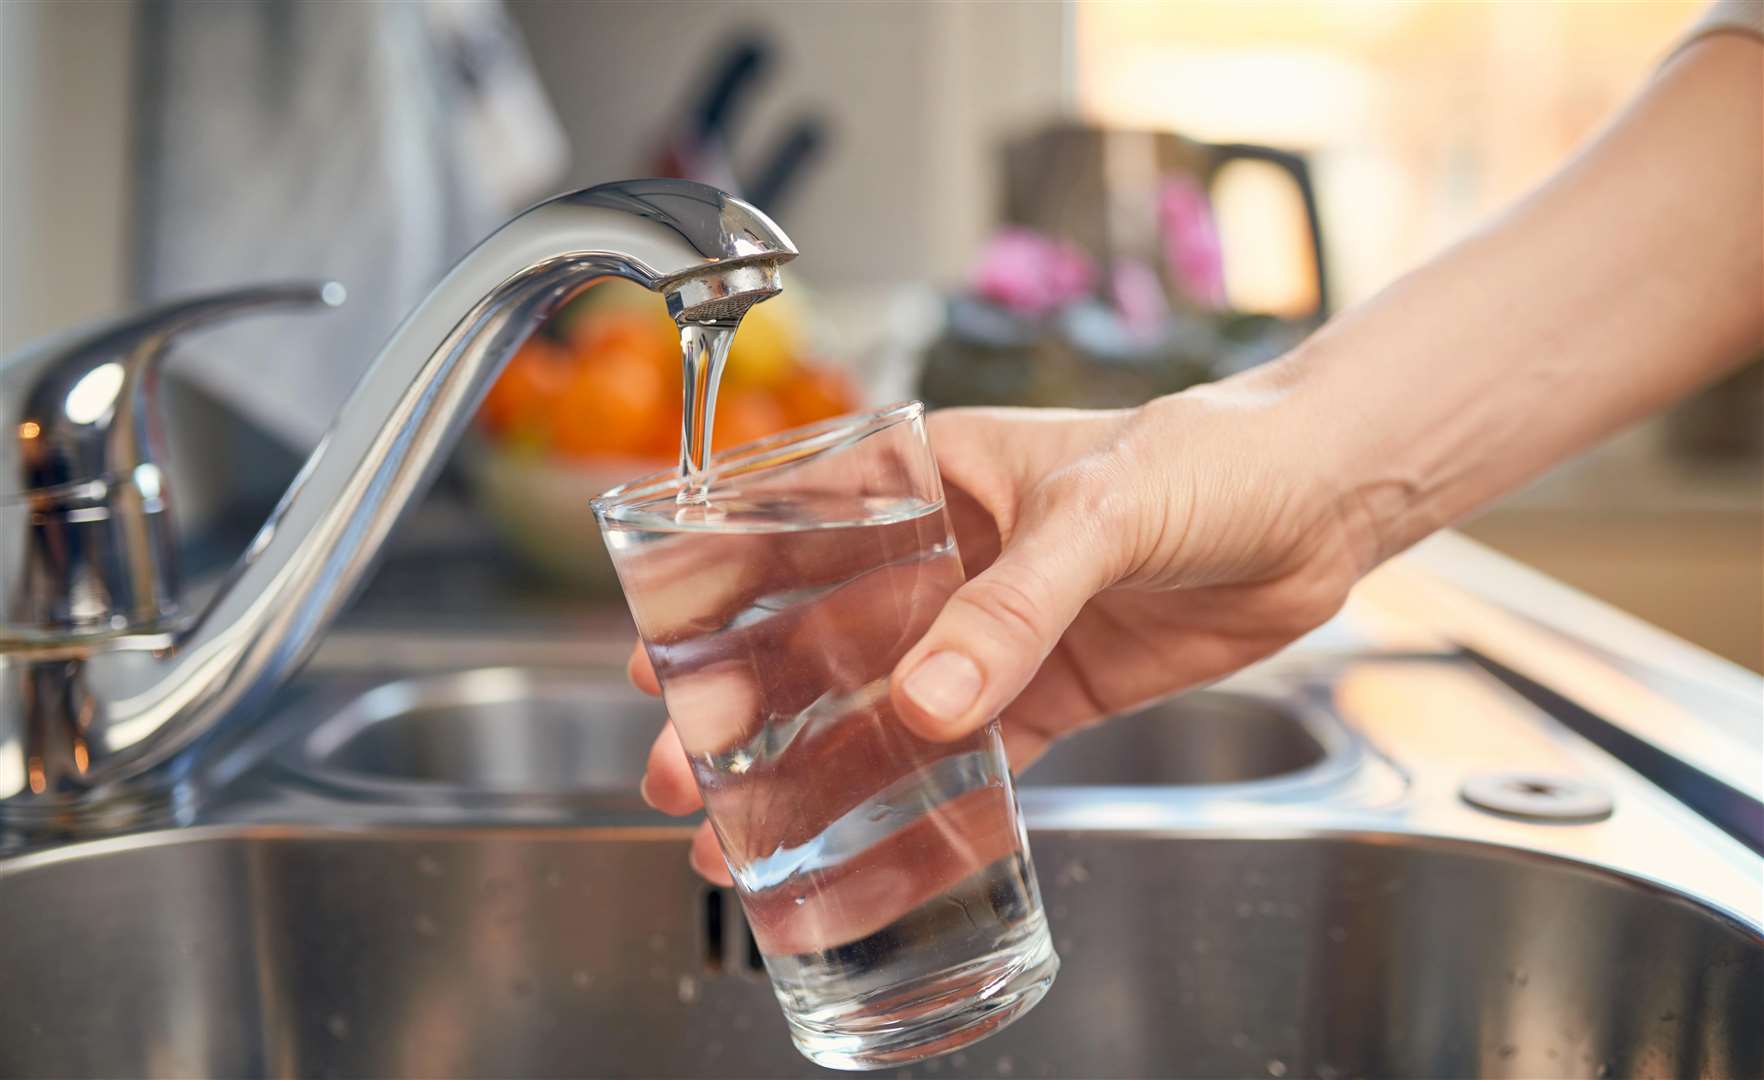 Residents of Tunbridge Wells reported being without water.